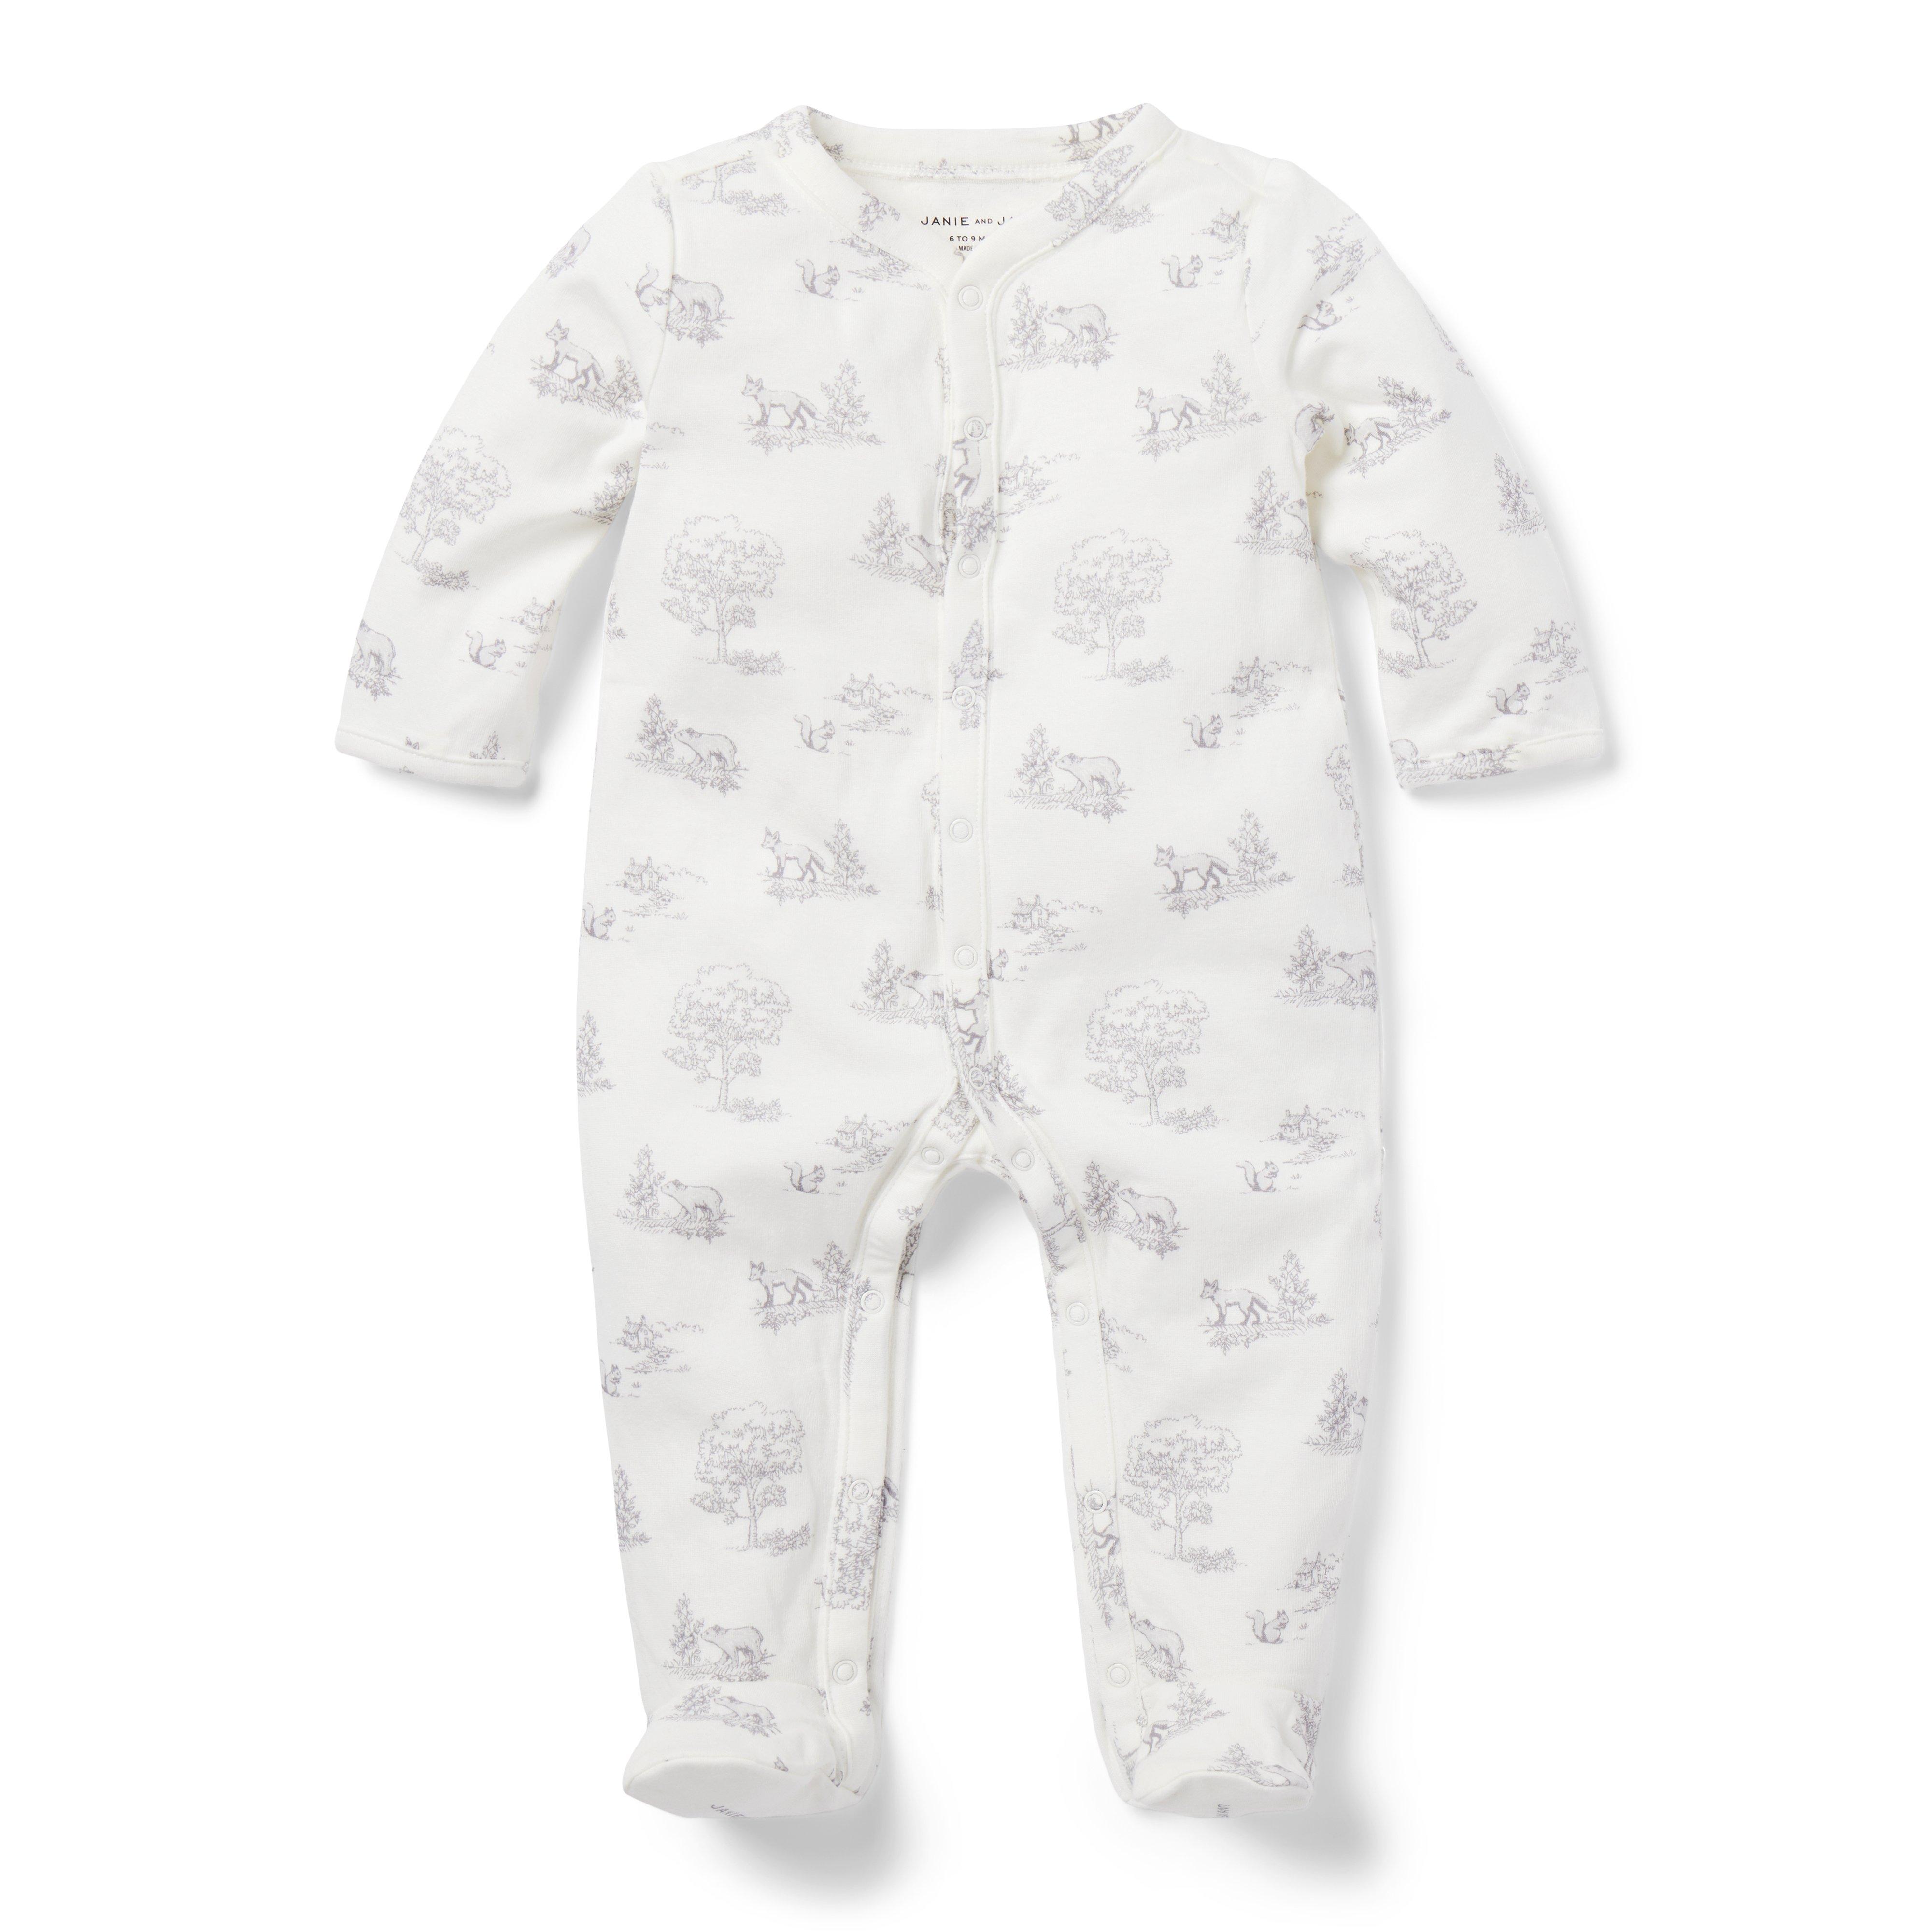 Newborn Baby Girl One-Pieces at Janie and Jack